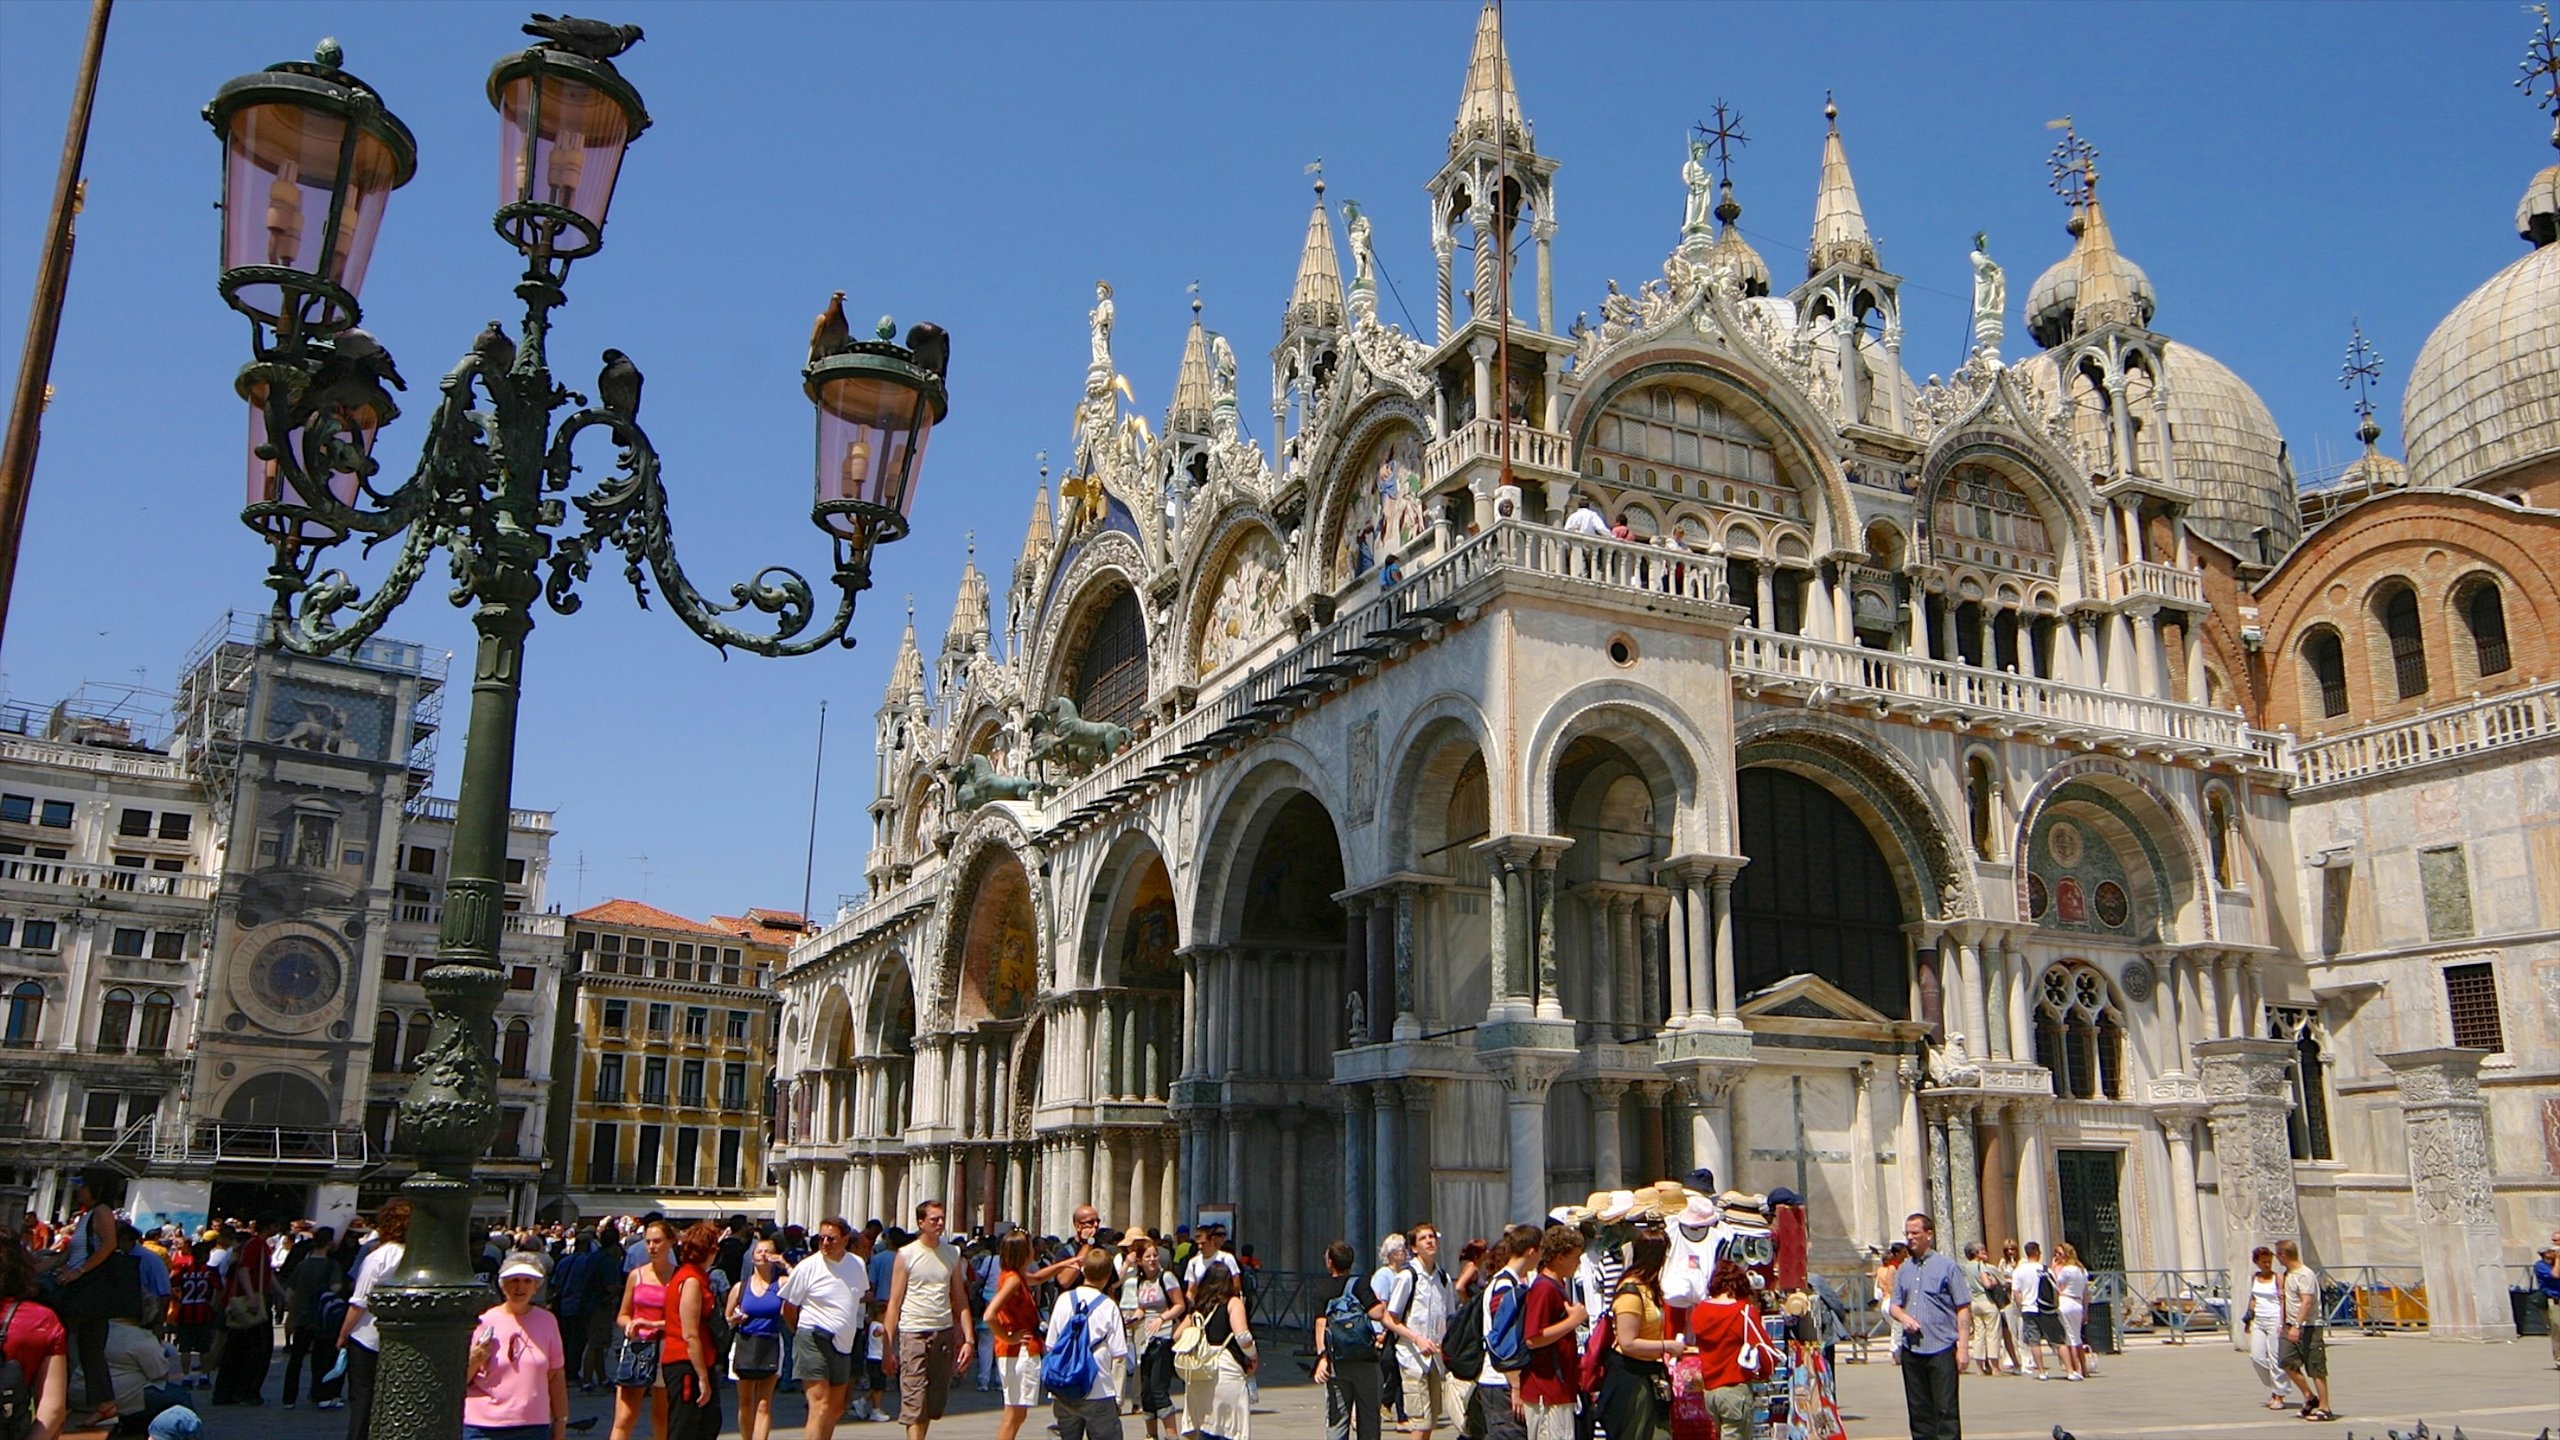 St. Mark's Basilica, St. Mark's Square accommodation, Venice holiday, Affordable stay, 2560x1440 HD Desktop